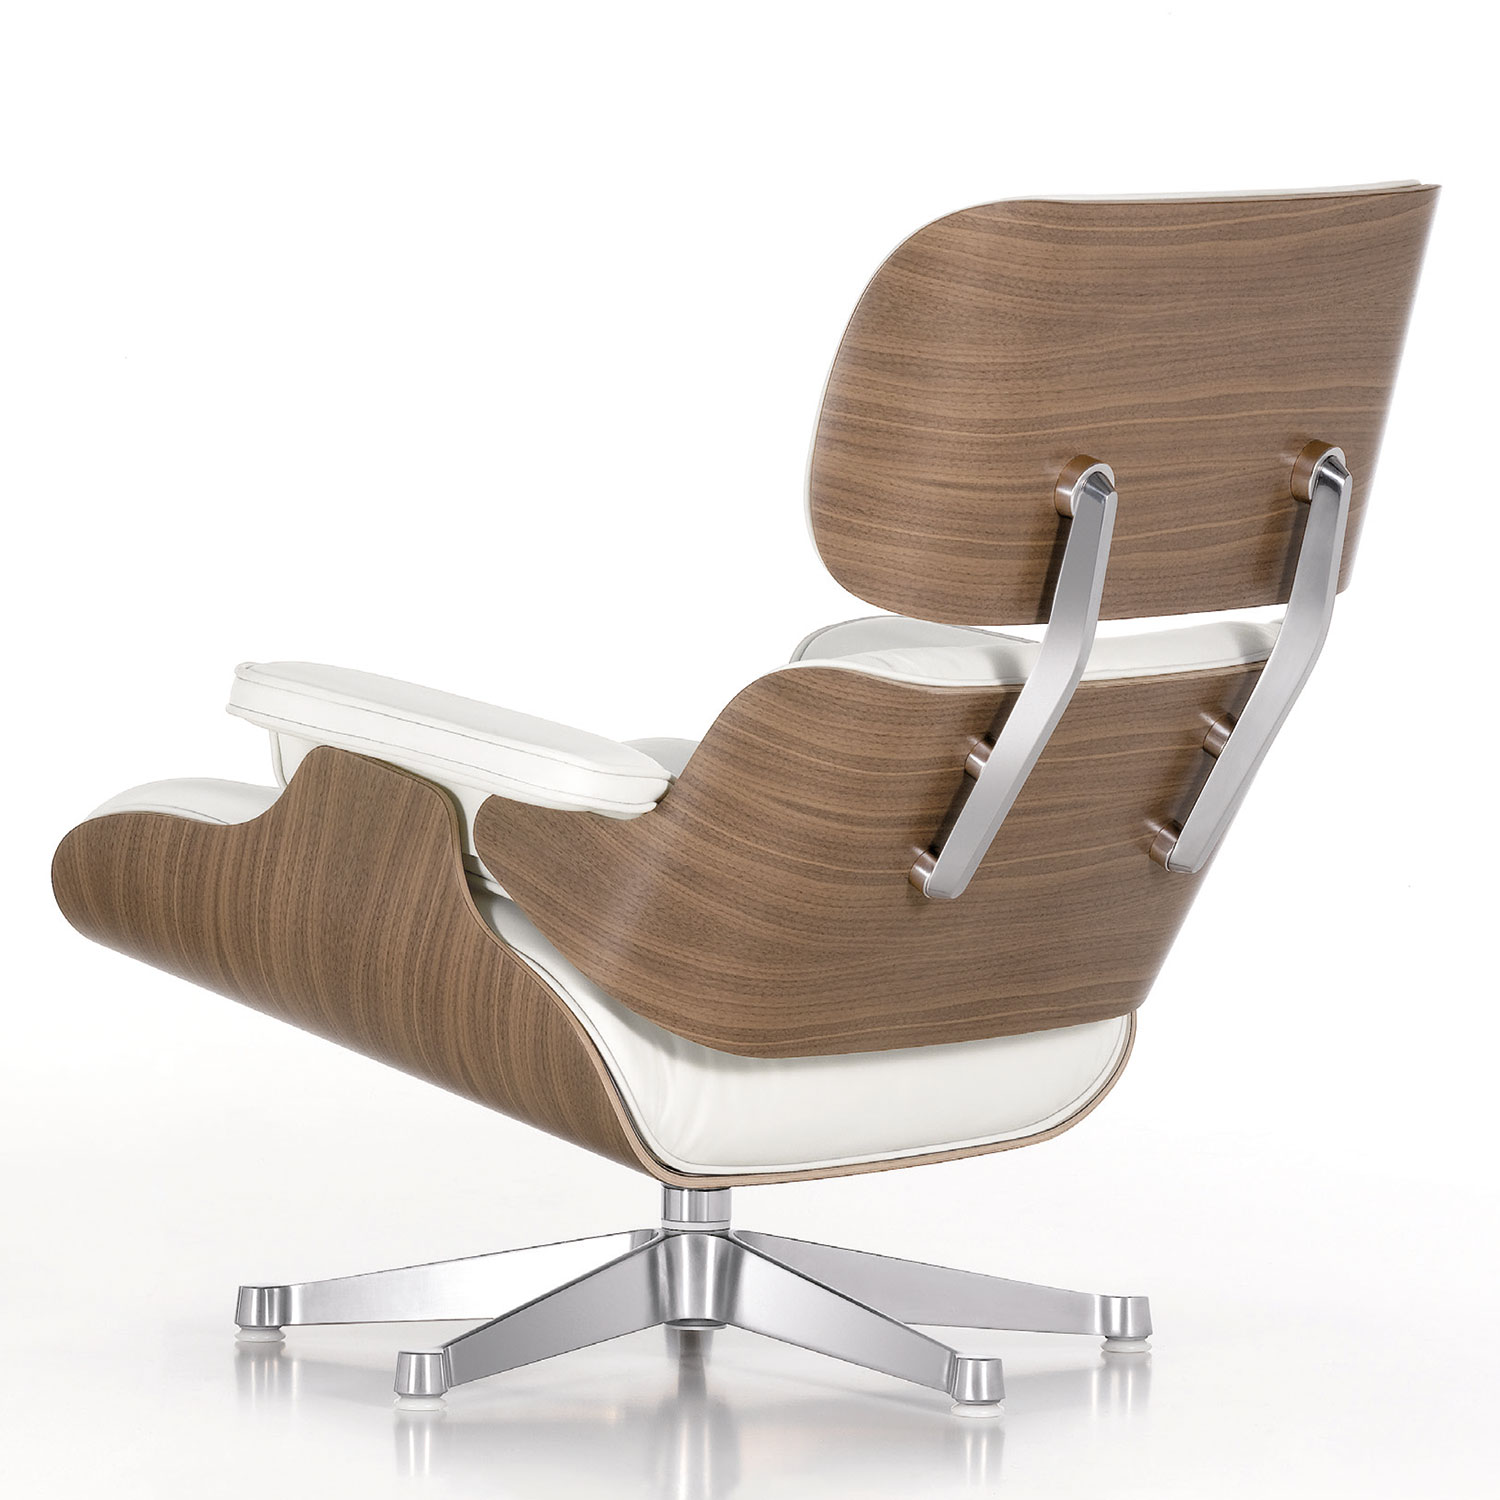 Vitra Eames Lounge Chair white | pro office